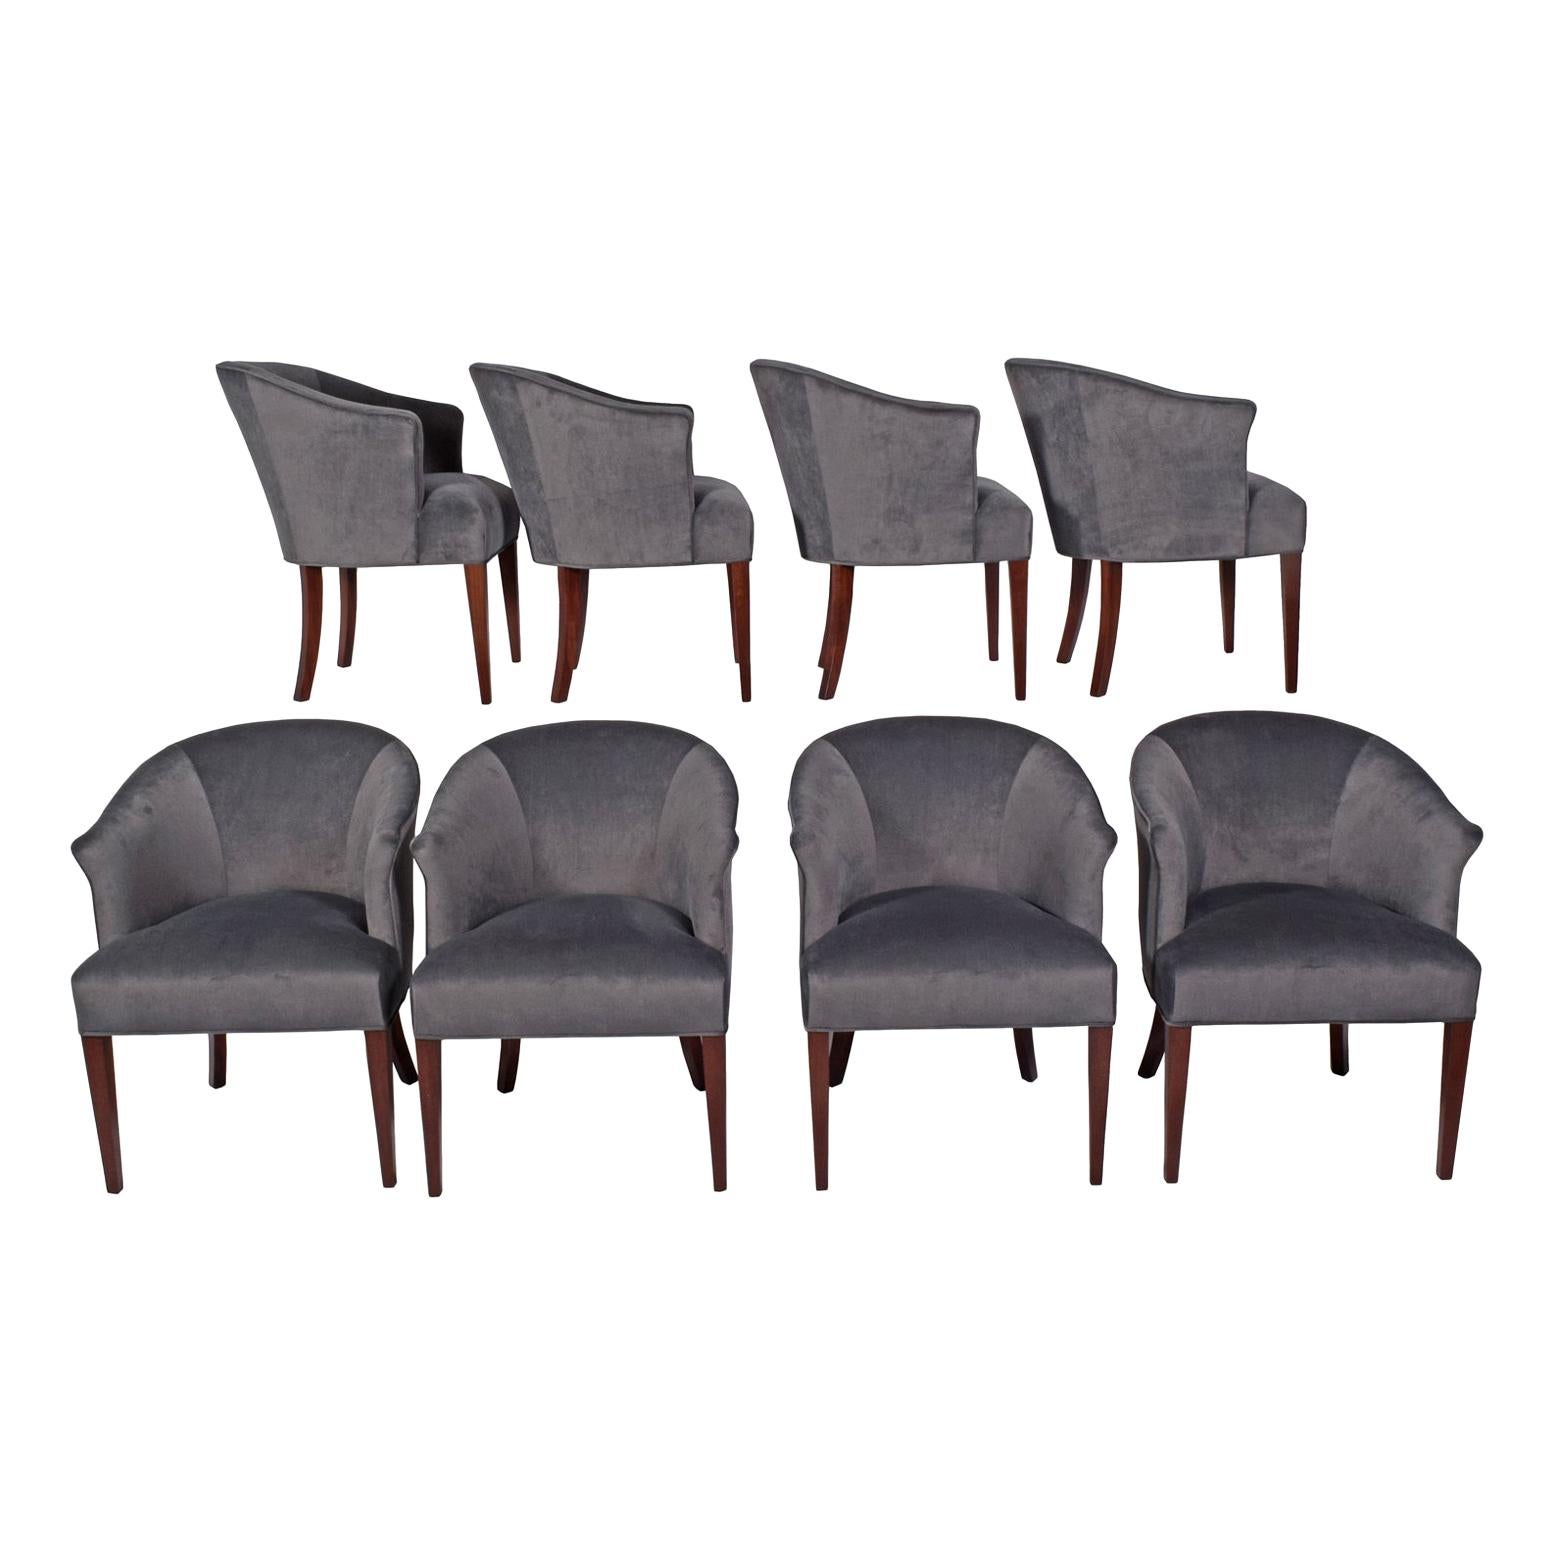 Eight Armchairs in Style of Edward Wormley